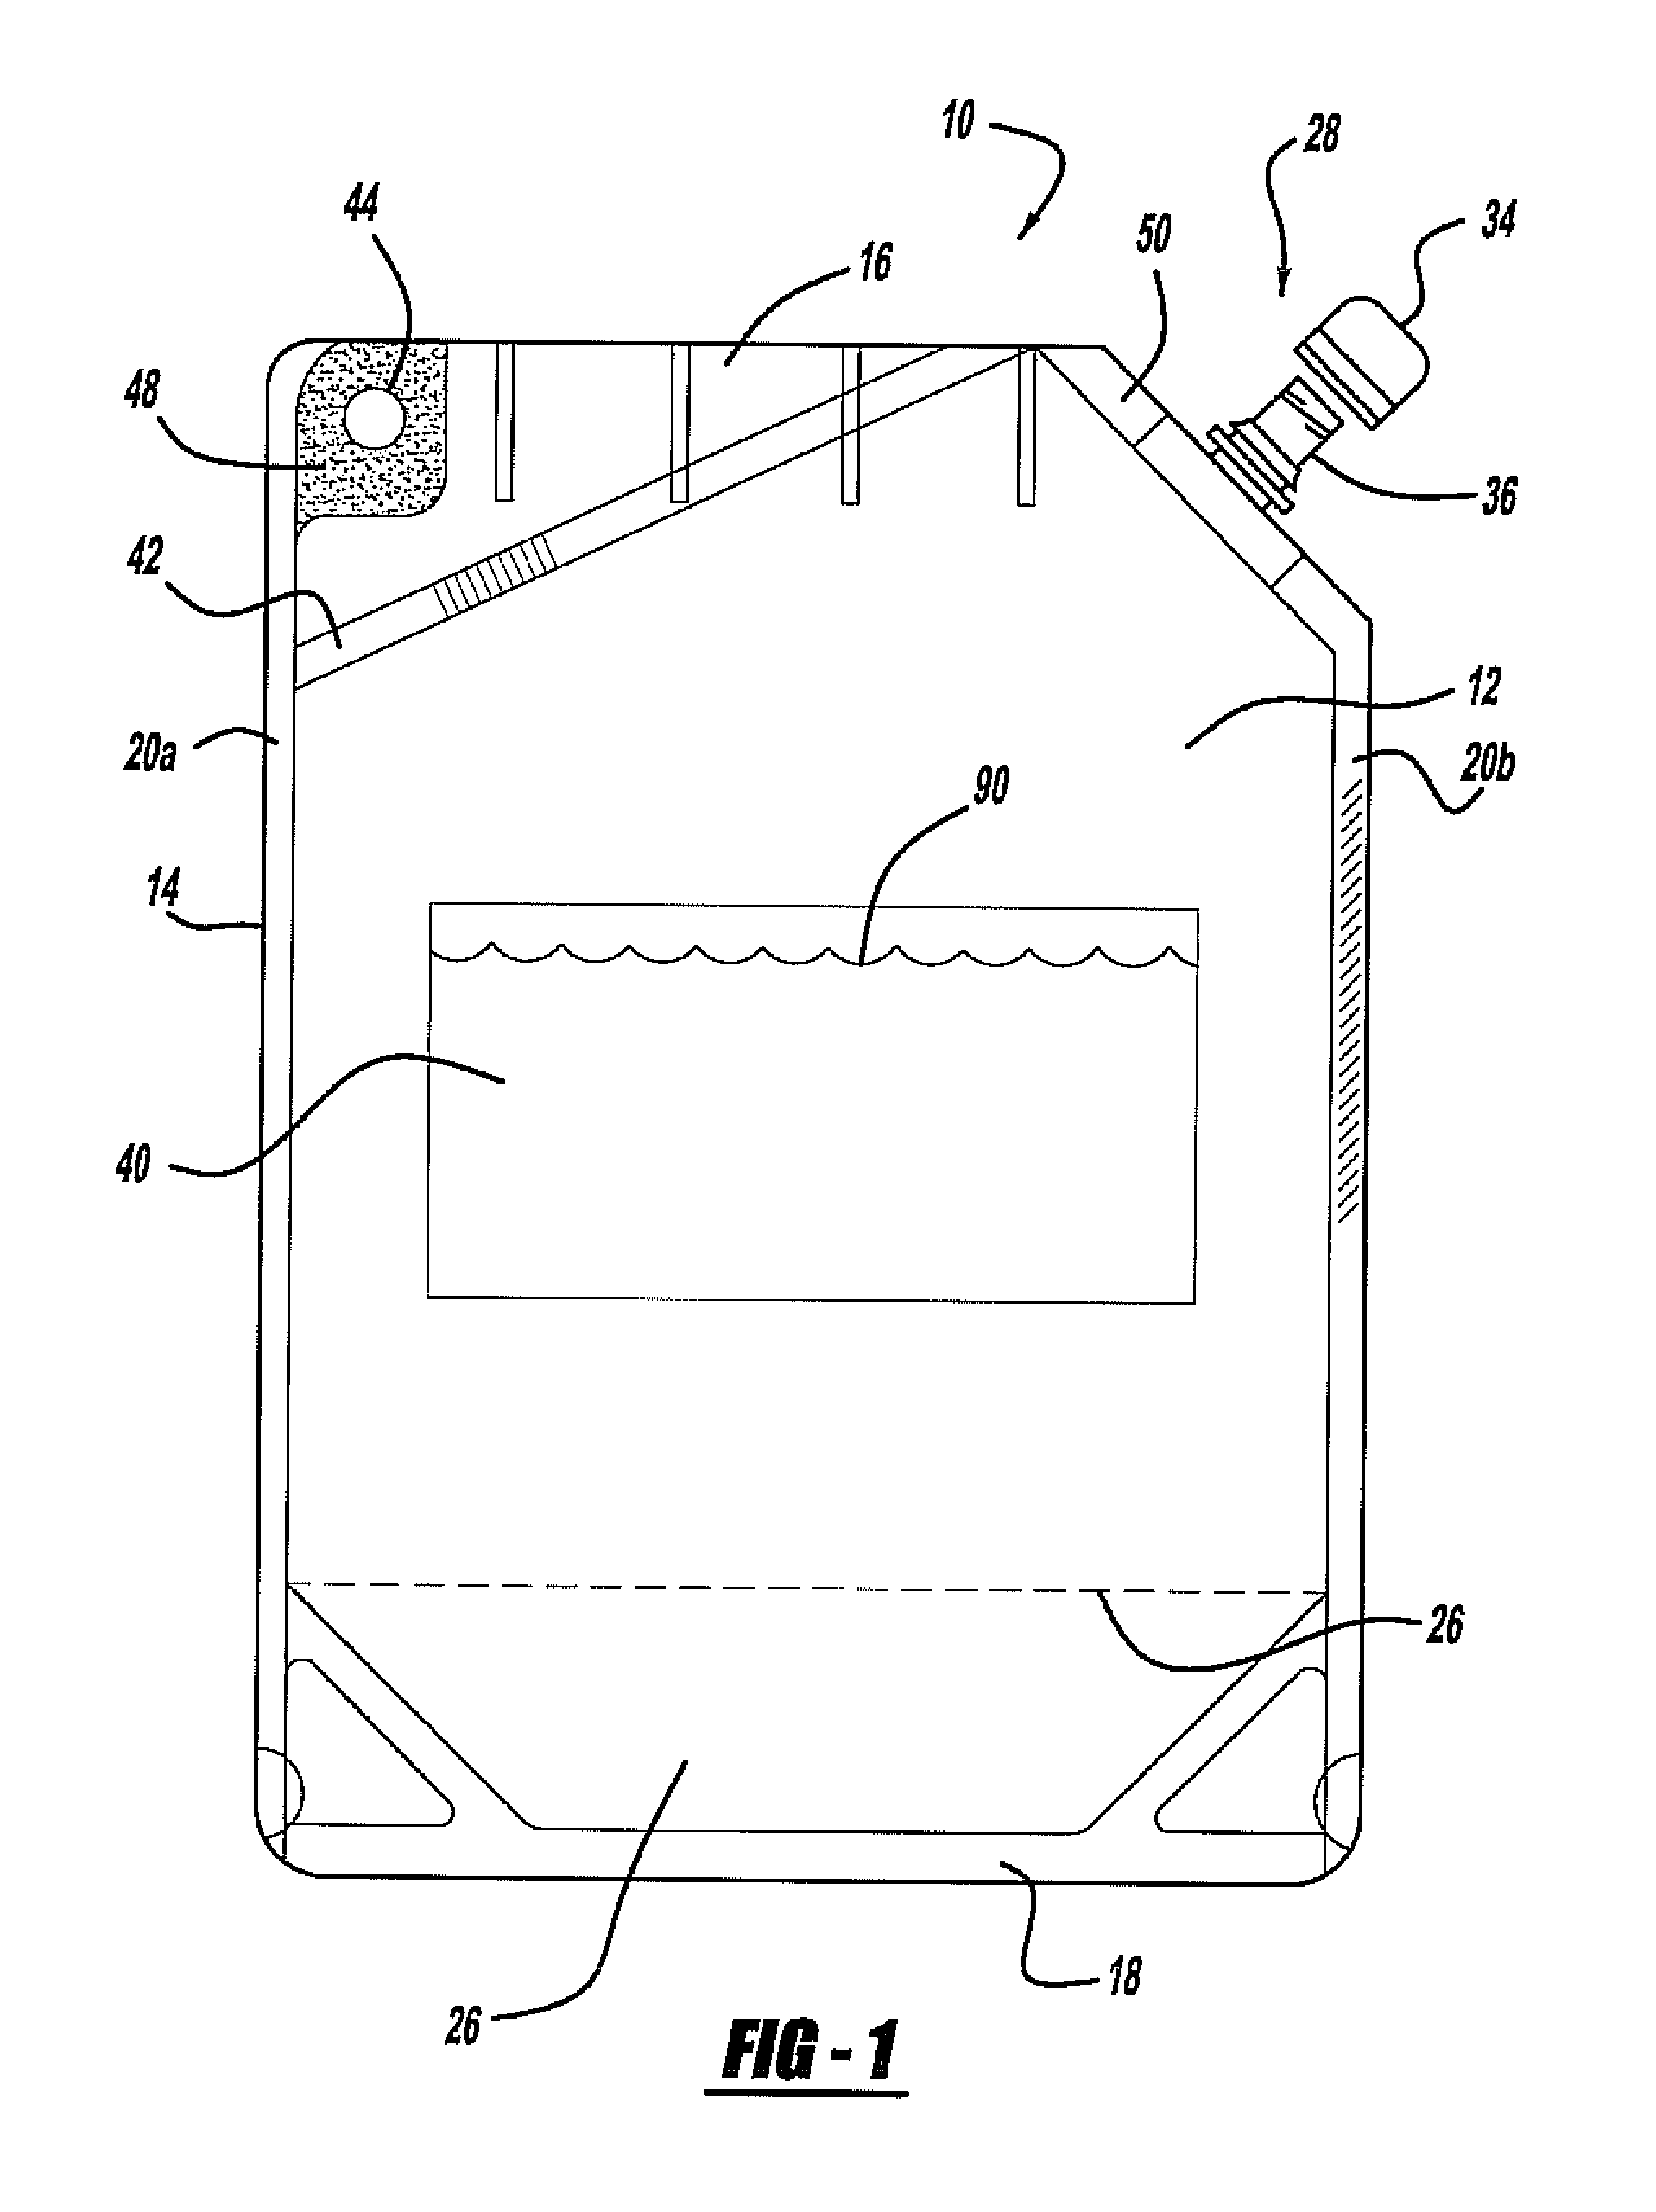 Flexible pouch for an alcoholic beverage and method of forming